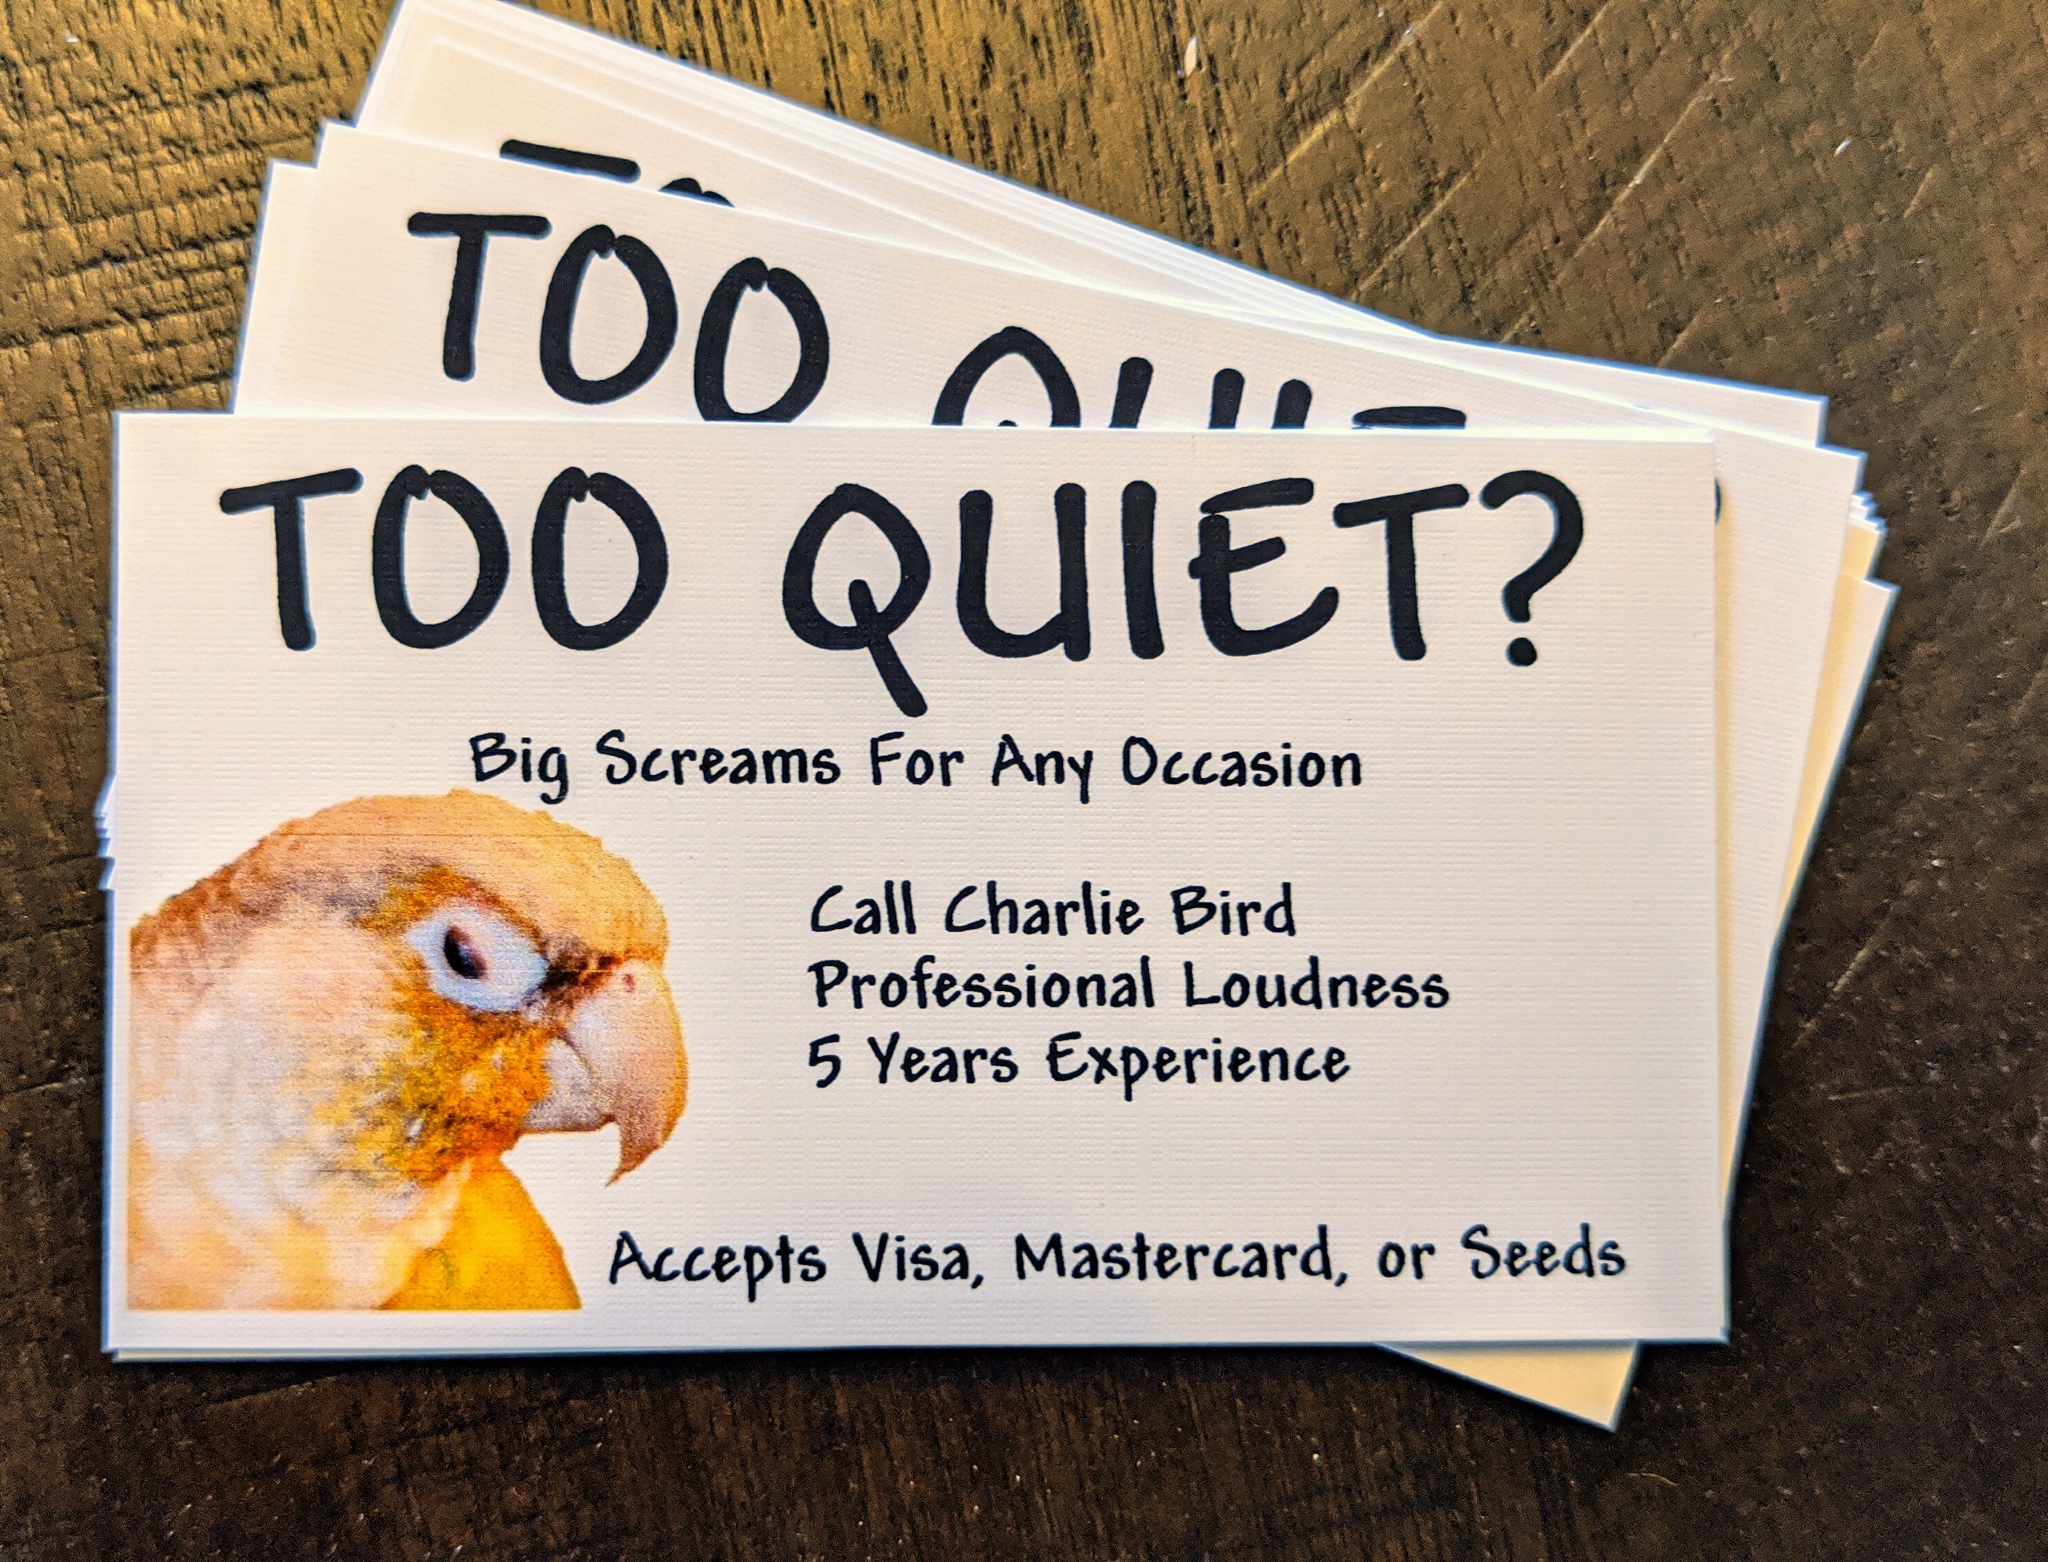 Too Milo Too Quiet? Big Screams For Any Occasion Call Charlie Bird Professional Loudness 5 Years Experience Accepts Visa, Mastercard, or Seeds